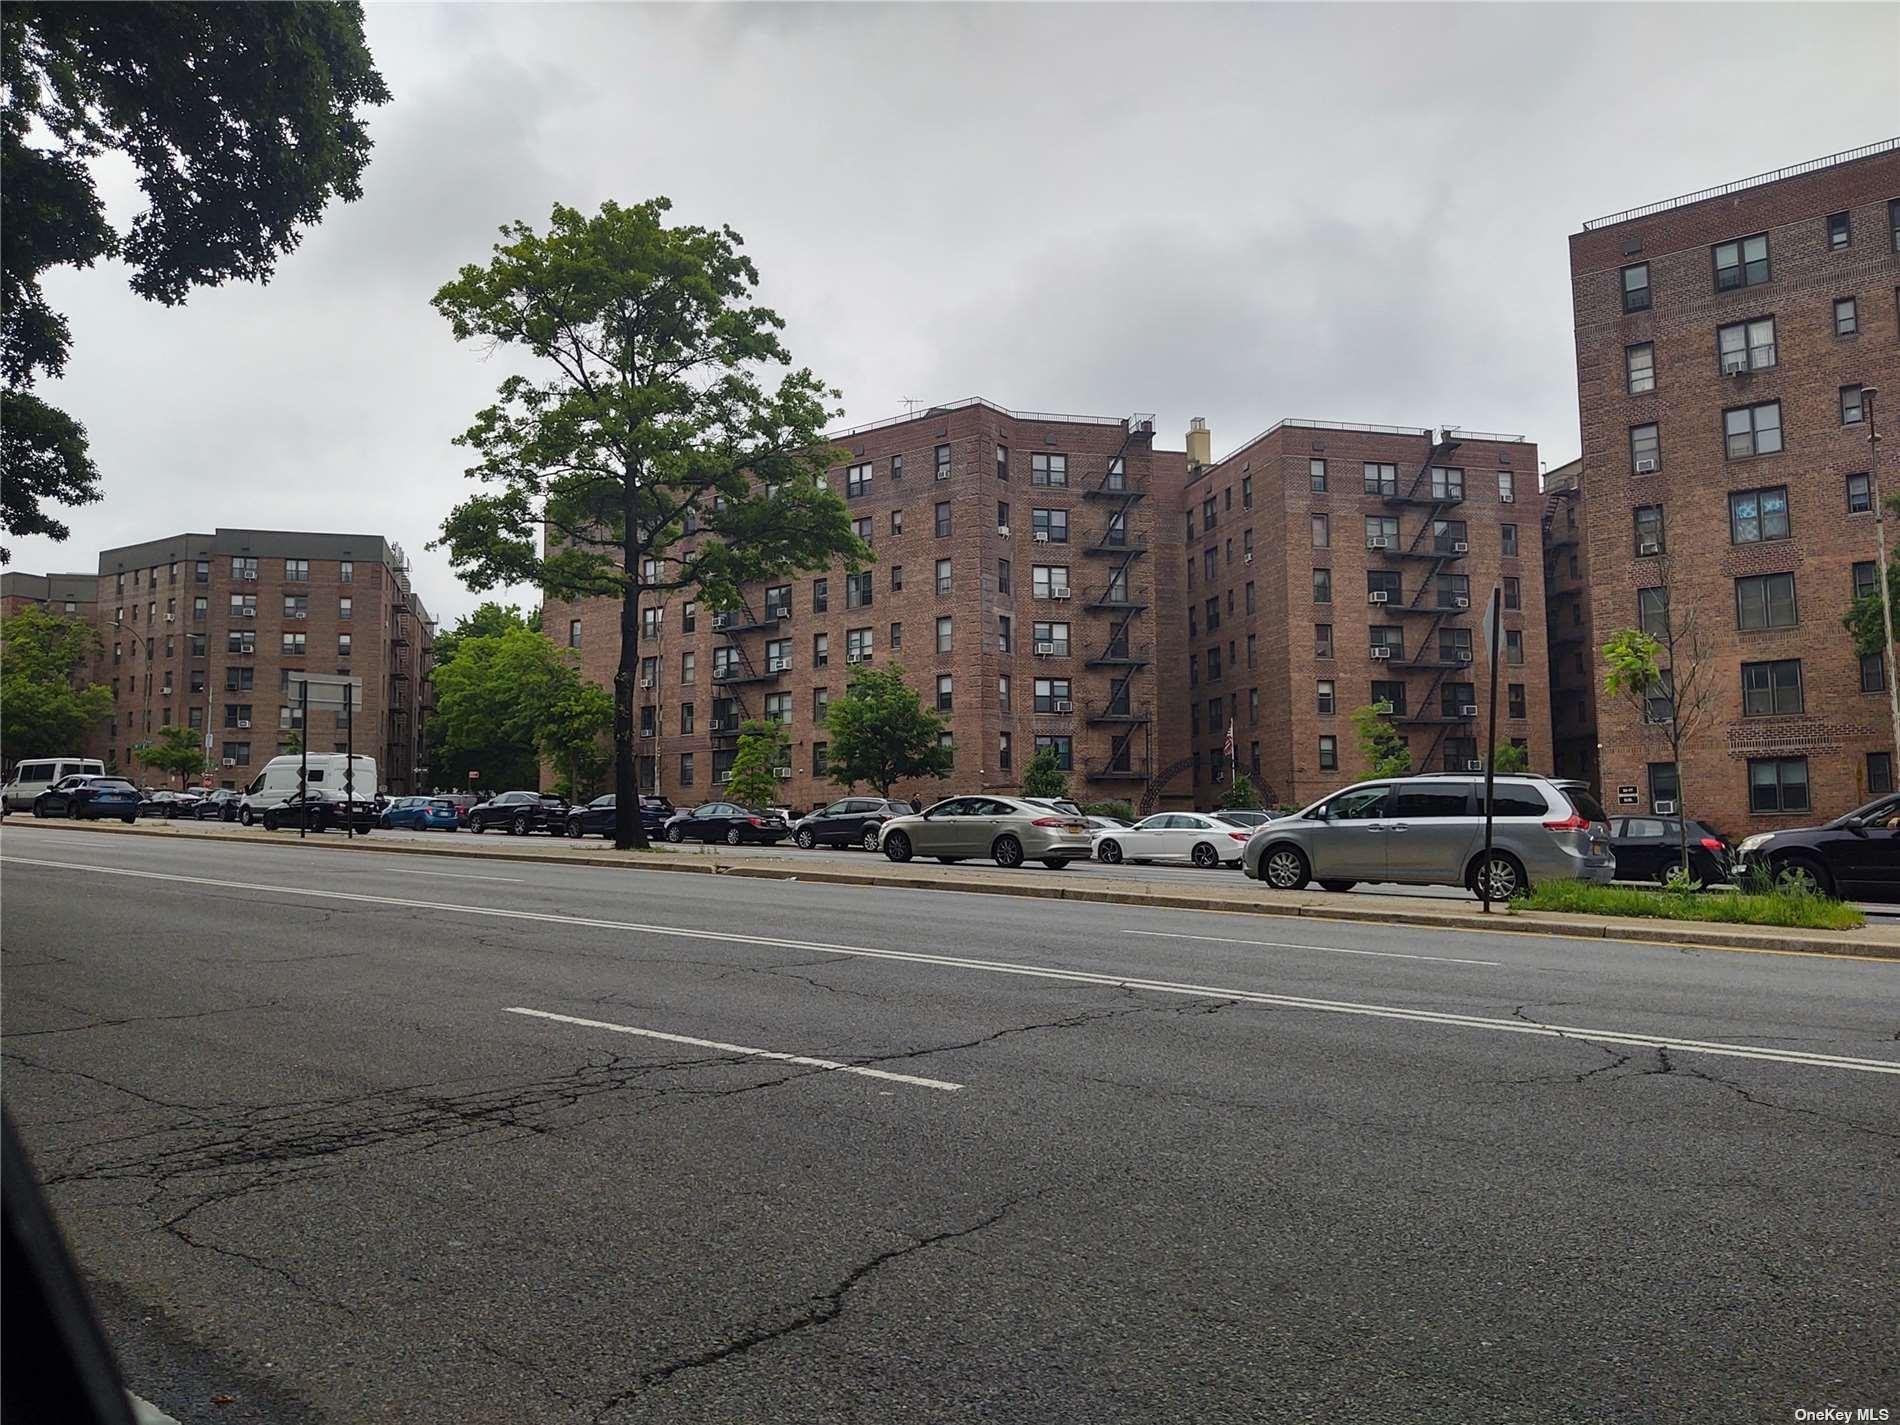 83-55 Woodhaven Blvd #5H in Queens, Woodhaven, NY 11421